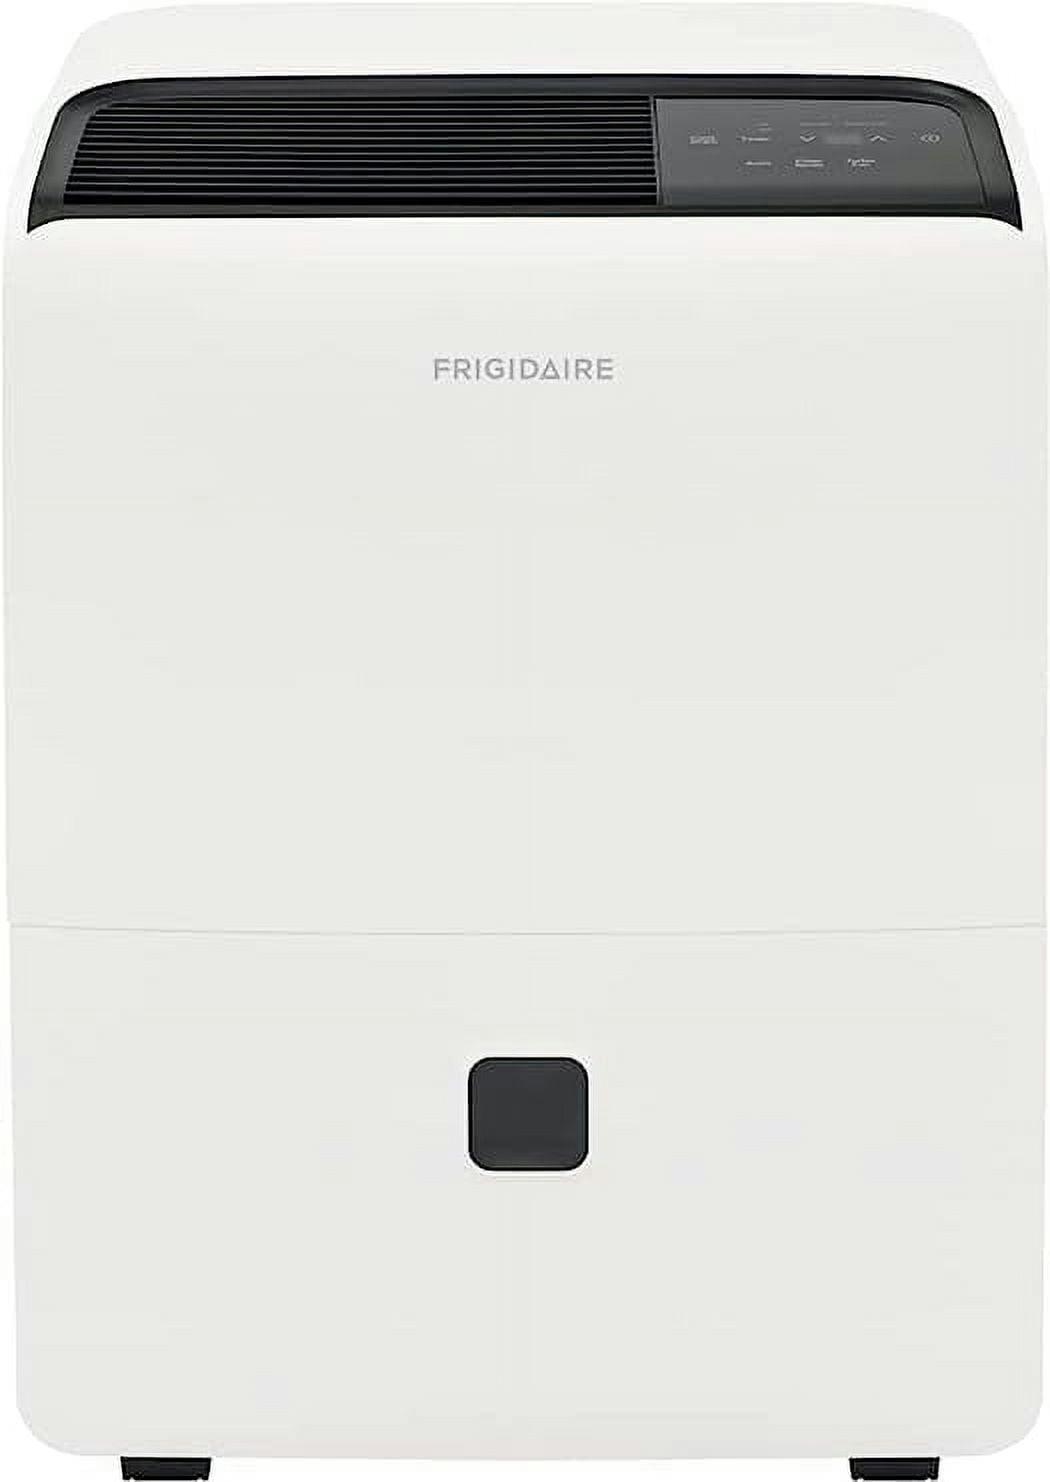 Frigidaire 60-Pint High Humidity Portable Dehumidifier with Washable Filter - White